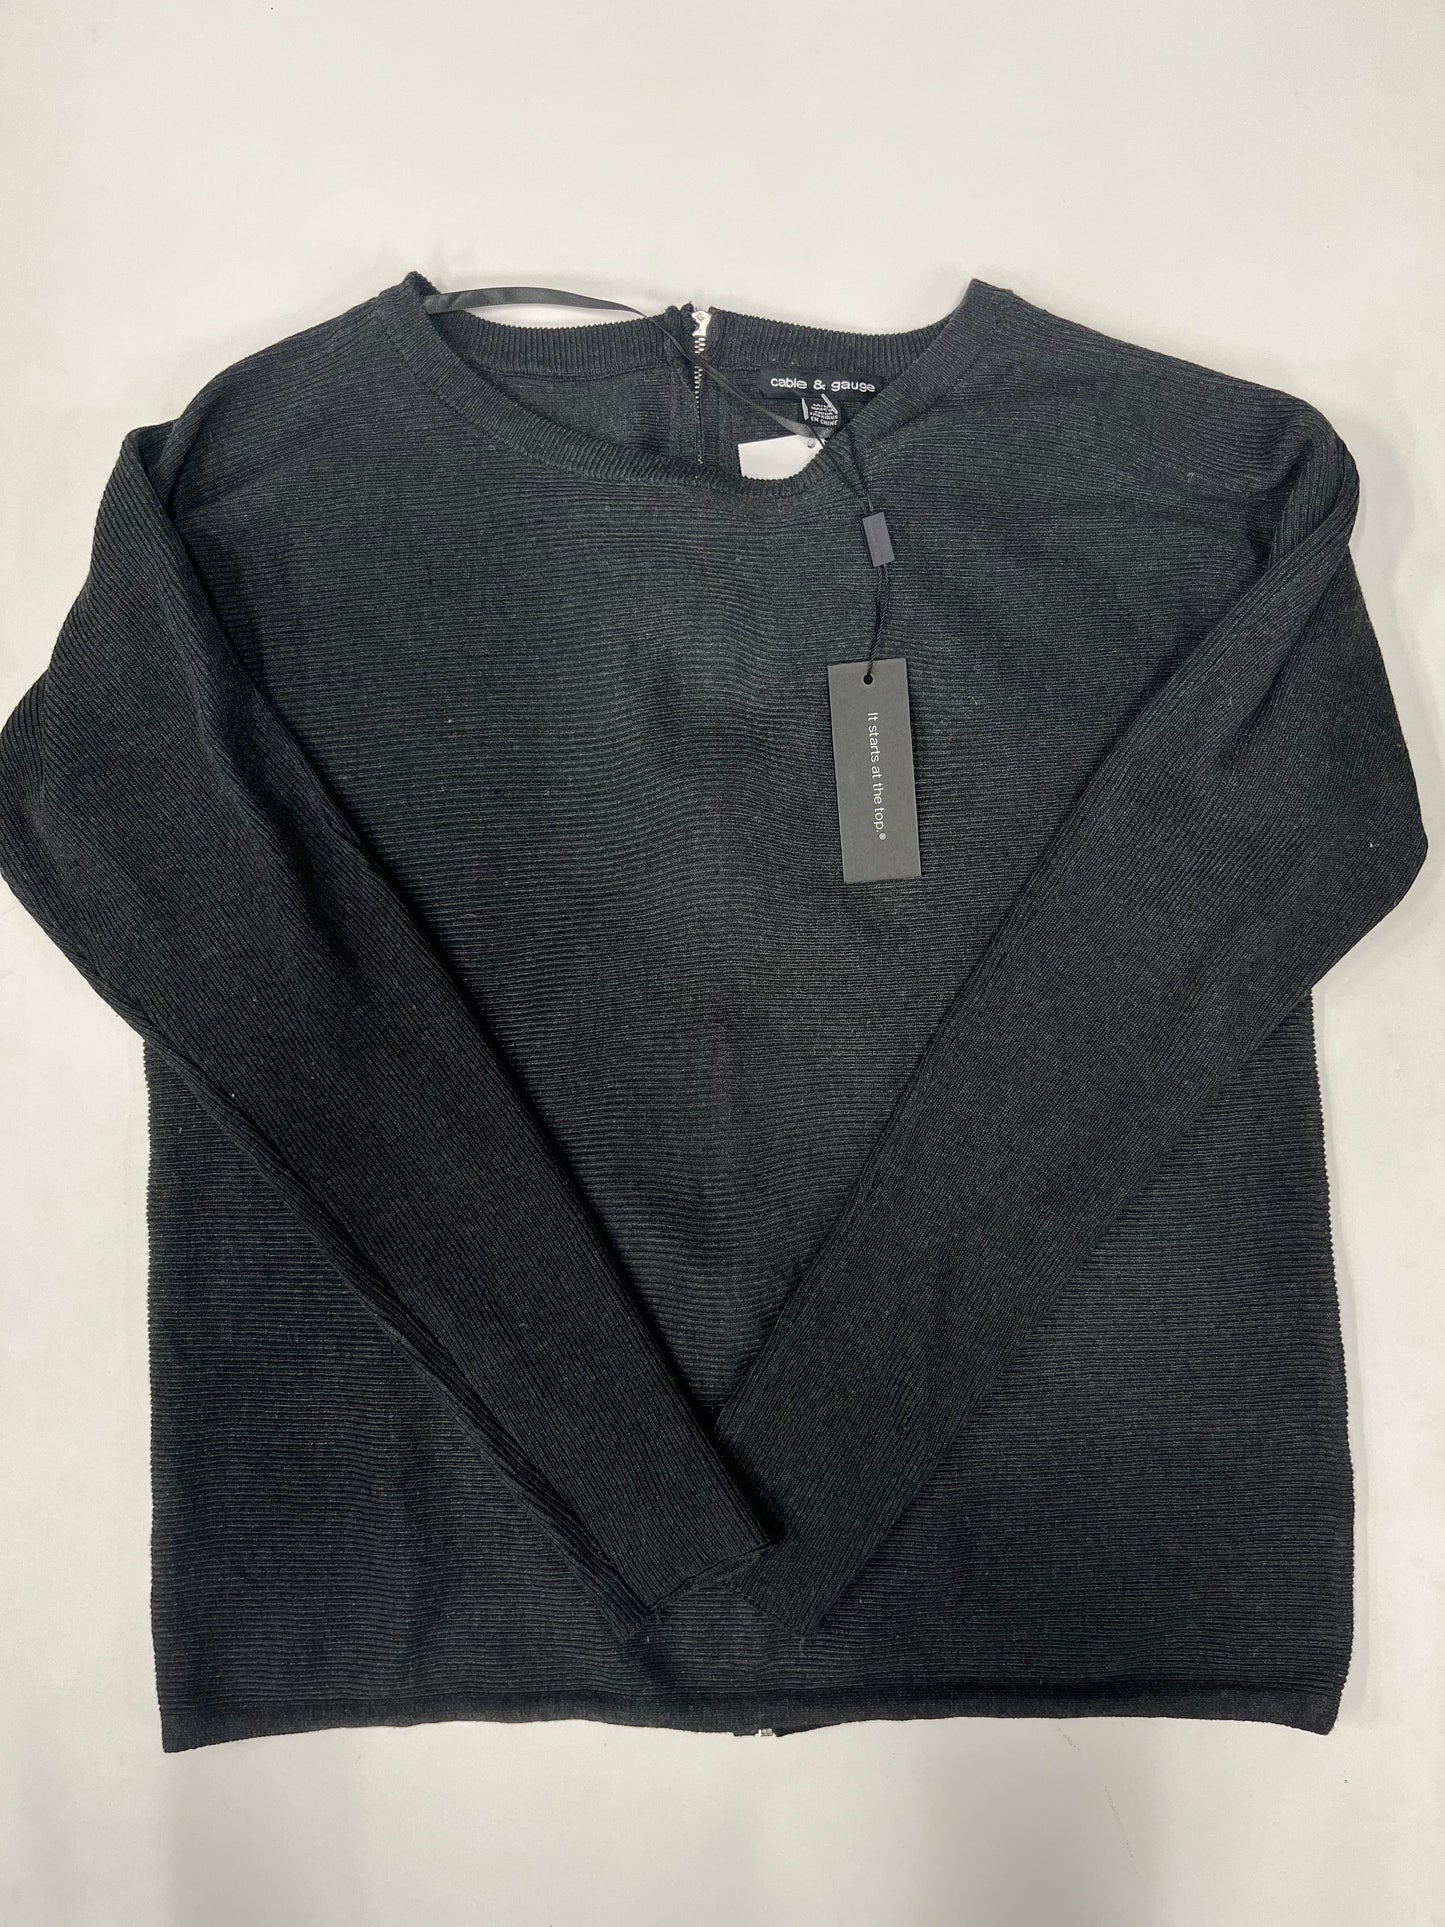 Sweater By Cable And Gauge NWT Size: M